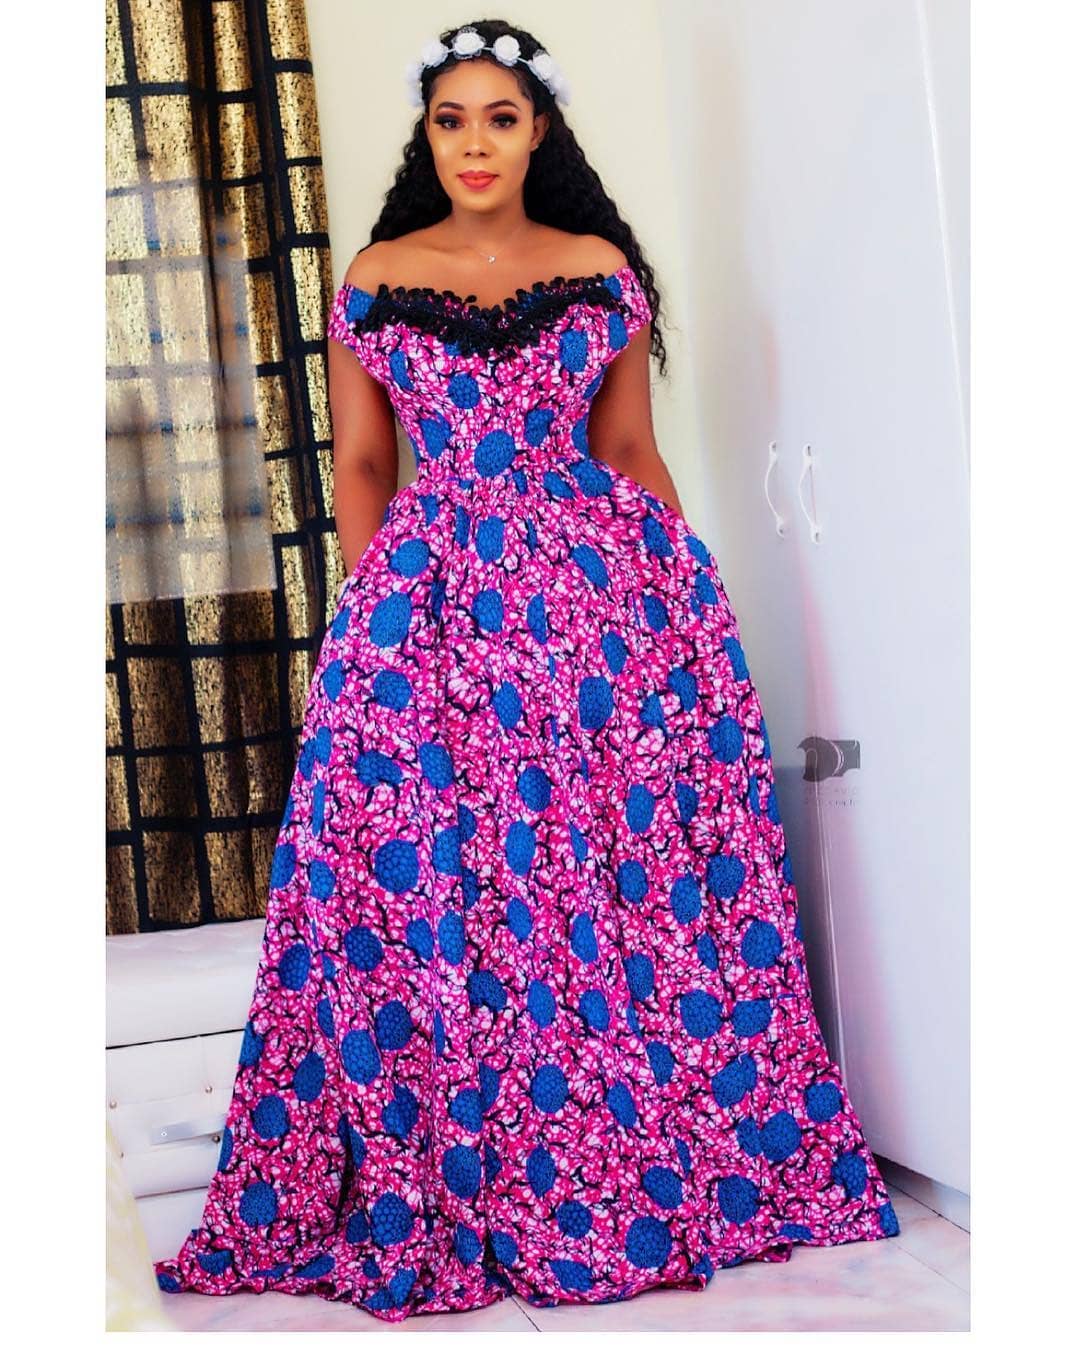 2019 Ankara Fashion Trends : Stay Stylish with These Latest African ...